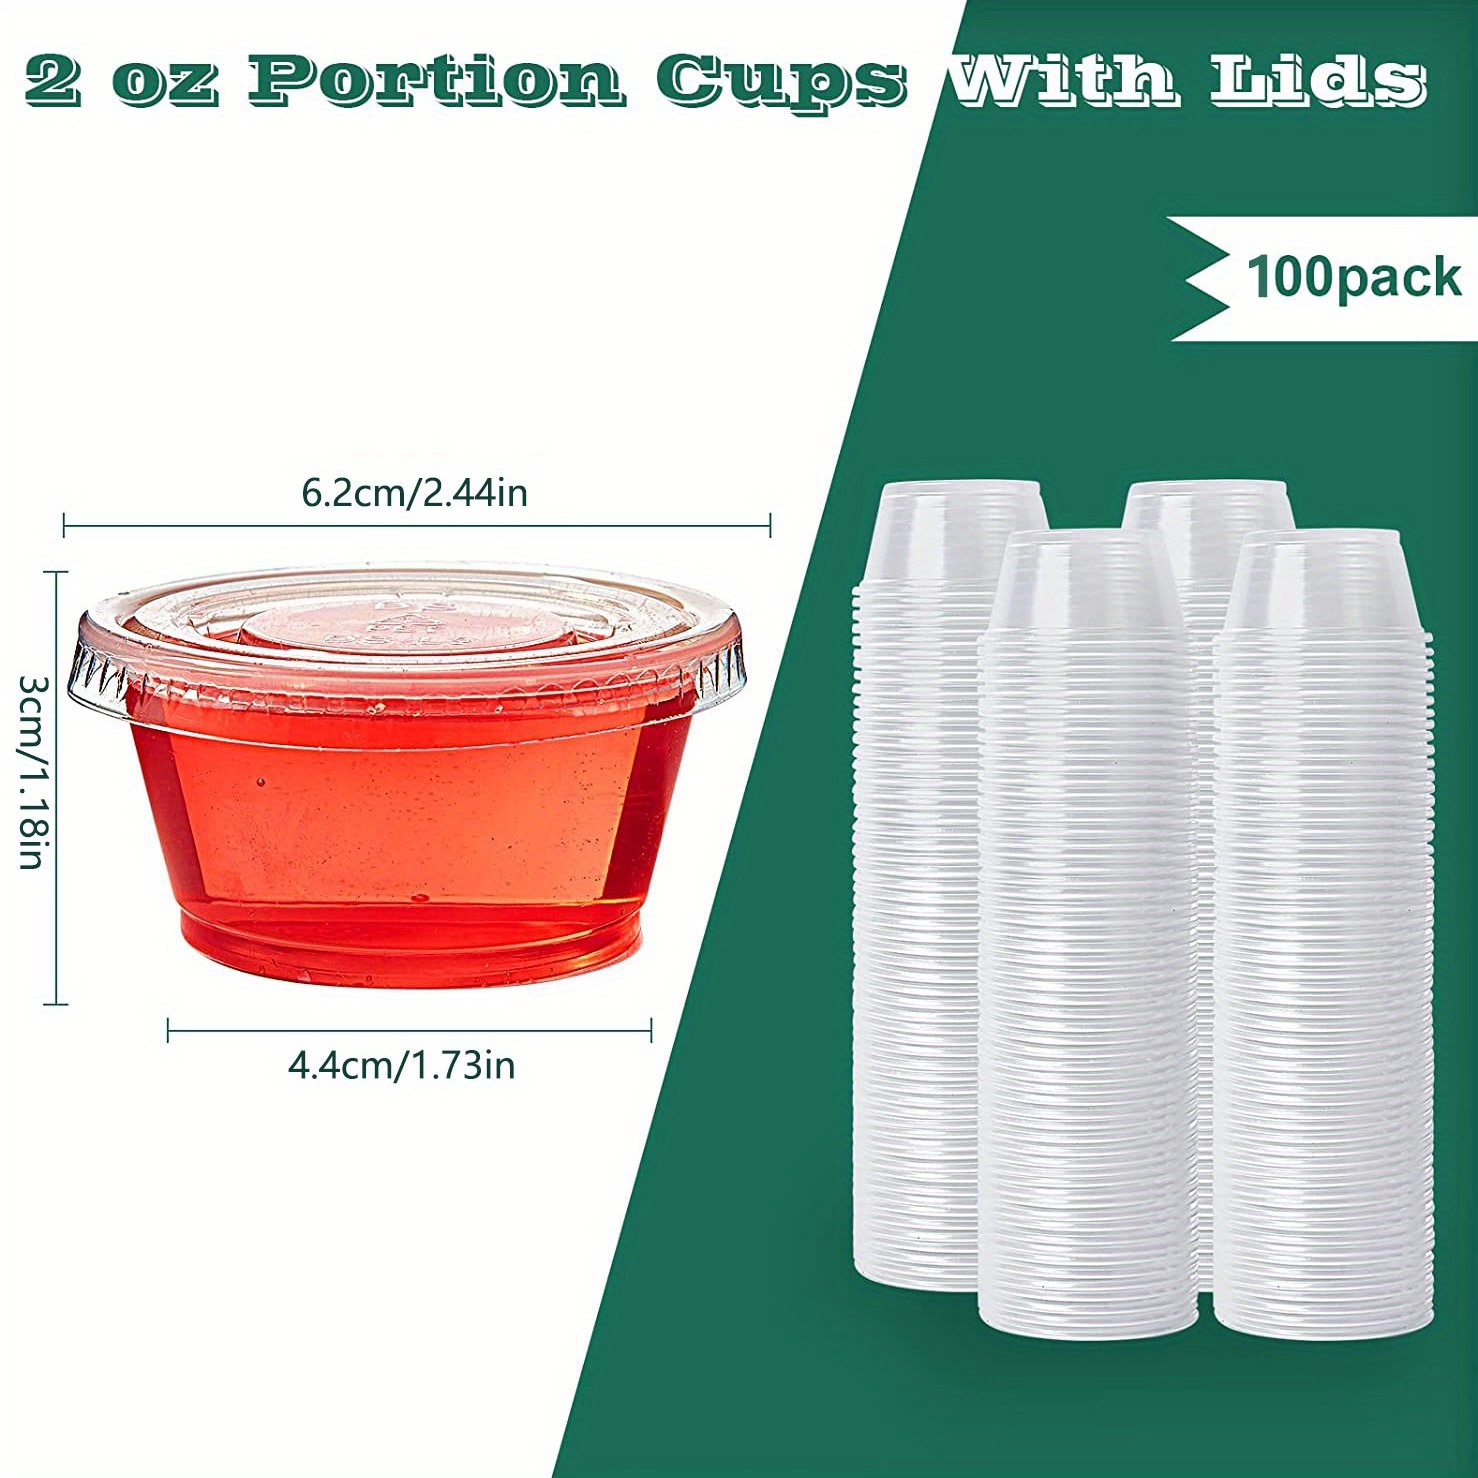 Tugerd 2 oz Portion Cups with Lids - 2500/2500 Combo Case